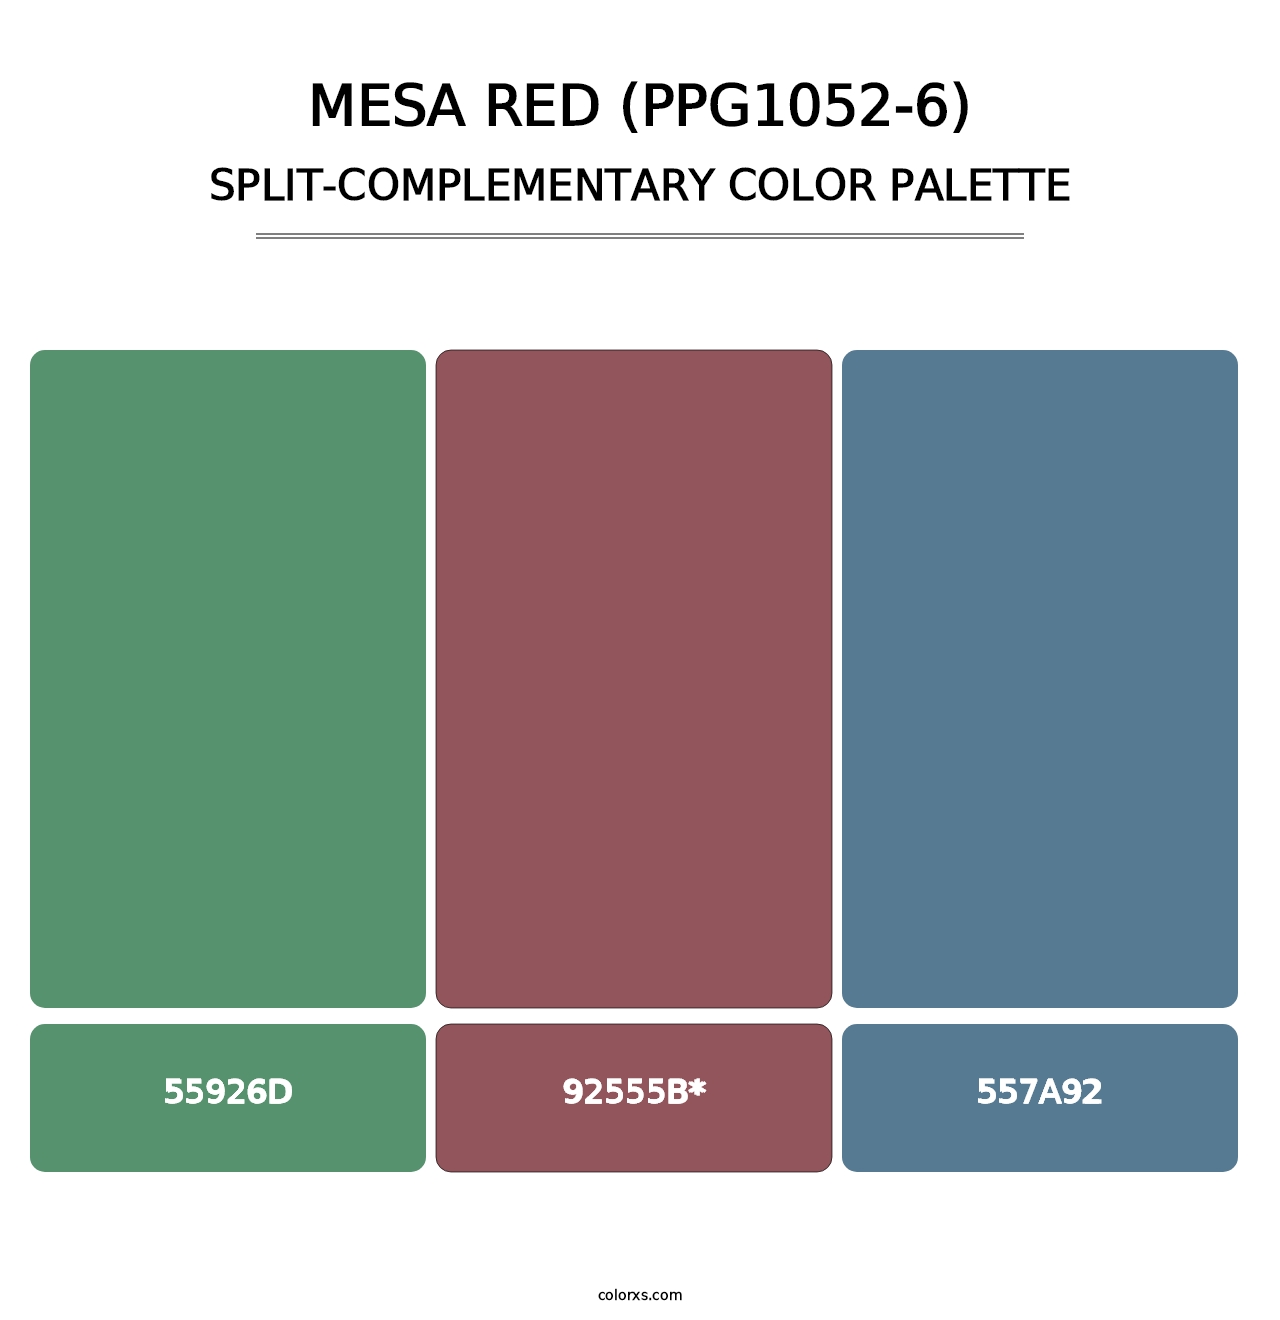 Mesa Red (PPG1052-6) - Split-Complementary Color Palette